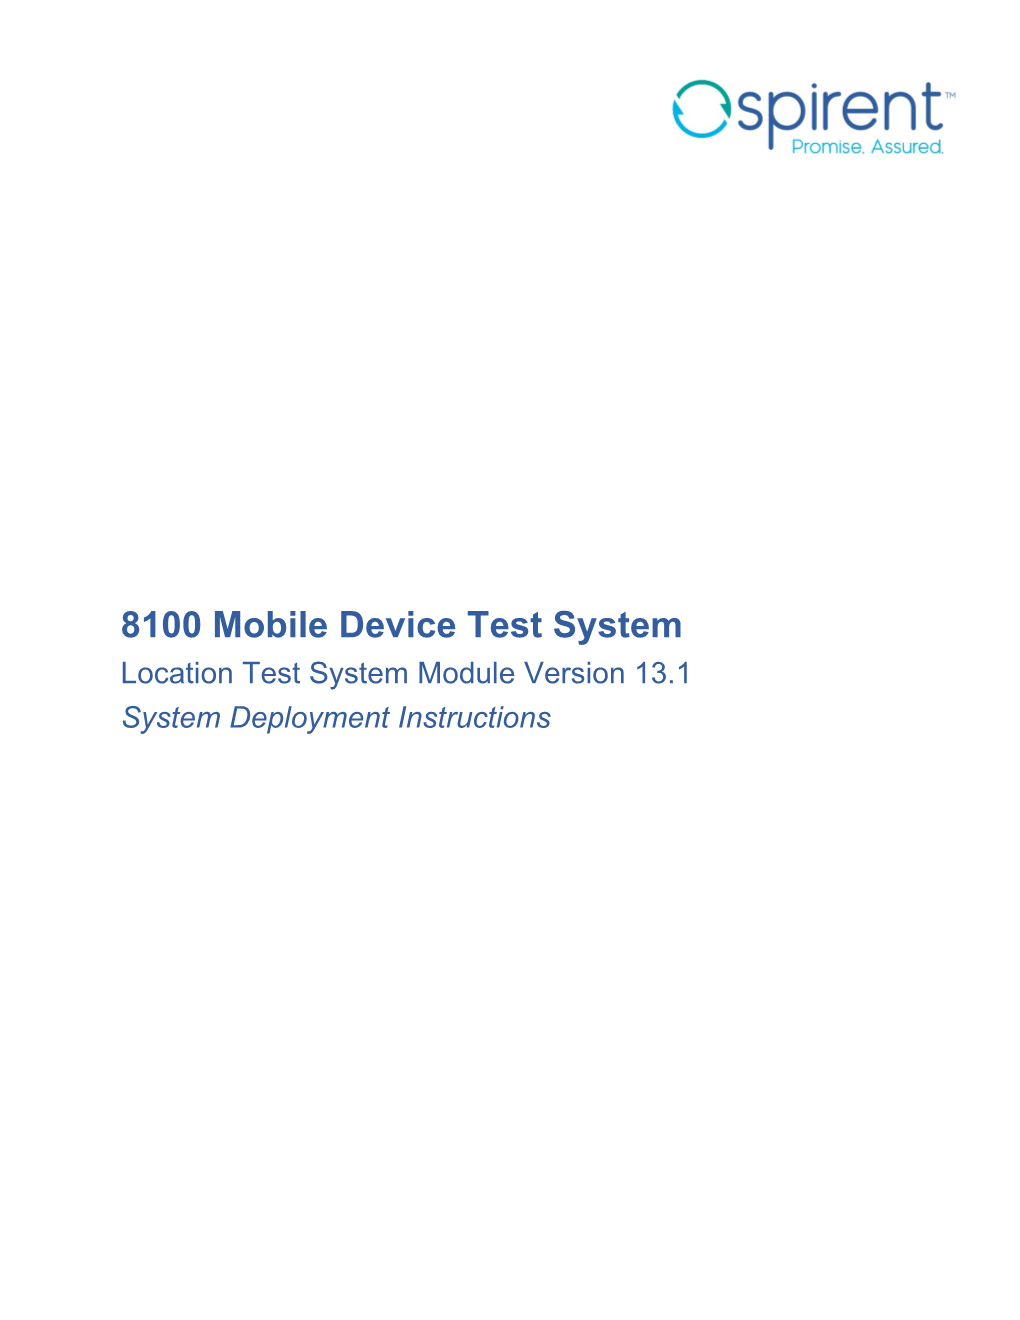 8100 Mobile Device Test System Location Test System Module Version 13.1 System Deployment Instructions